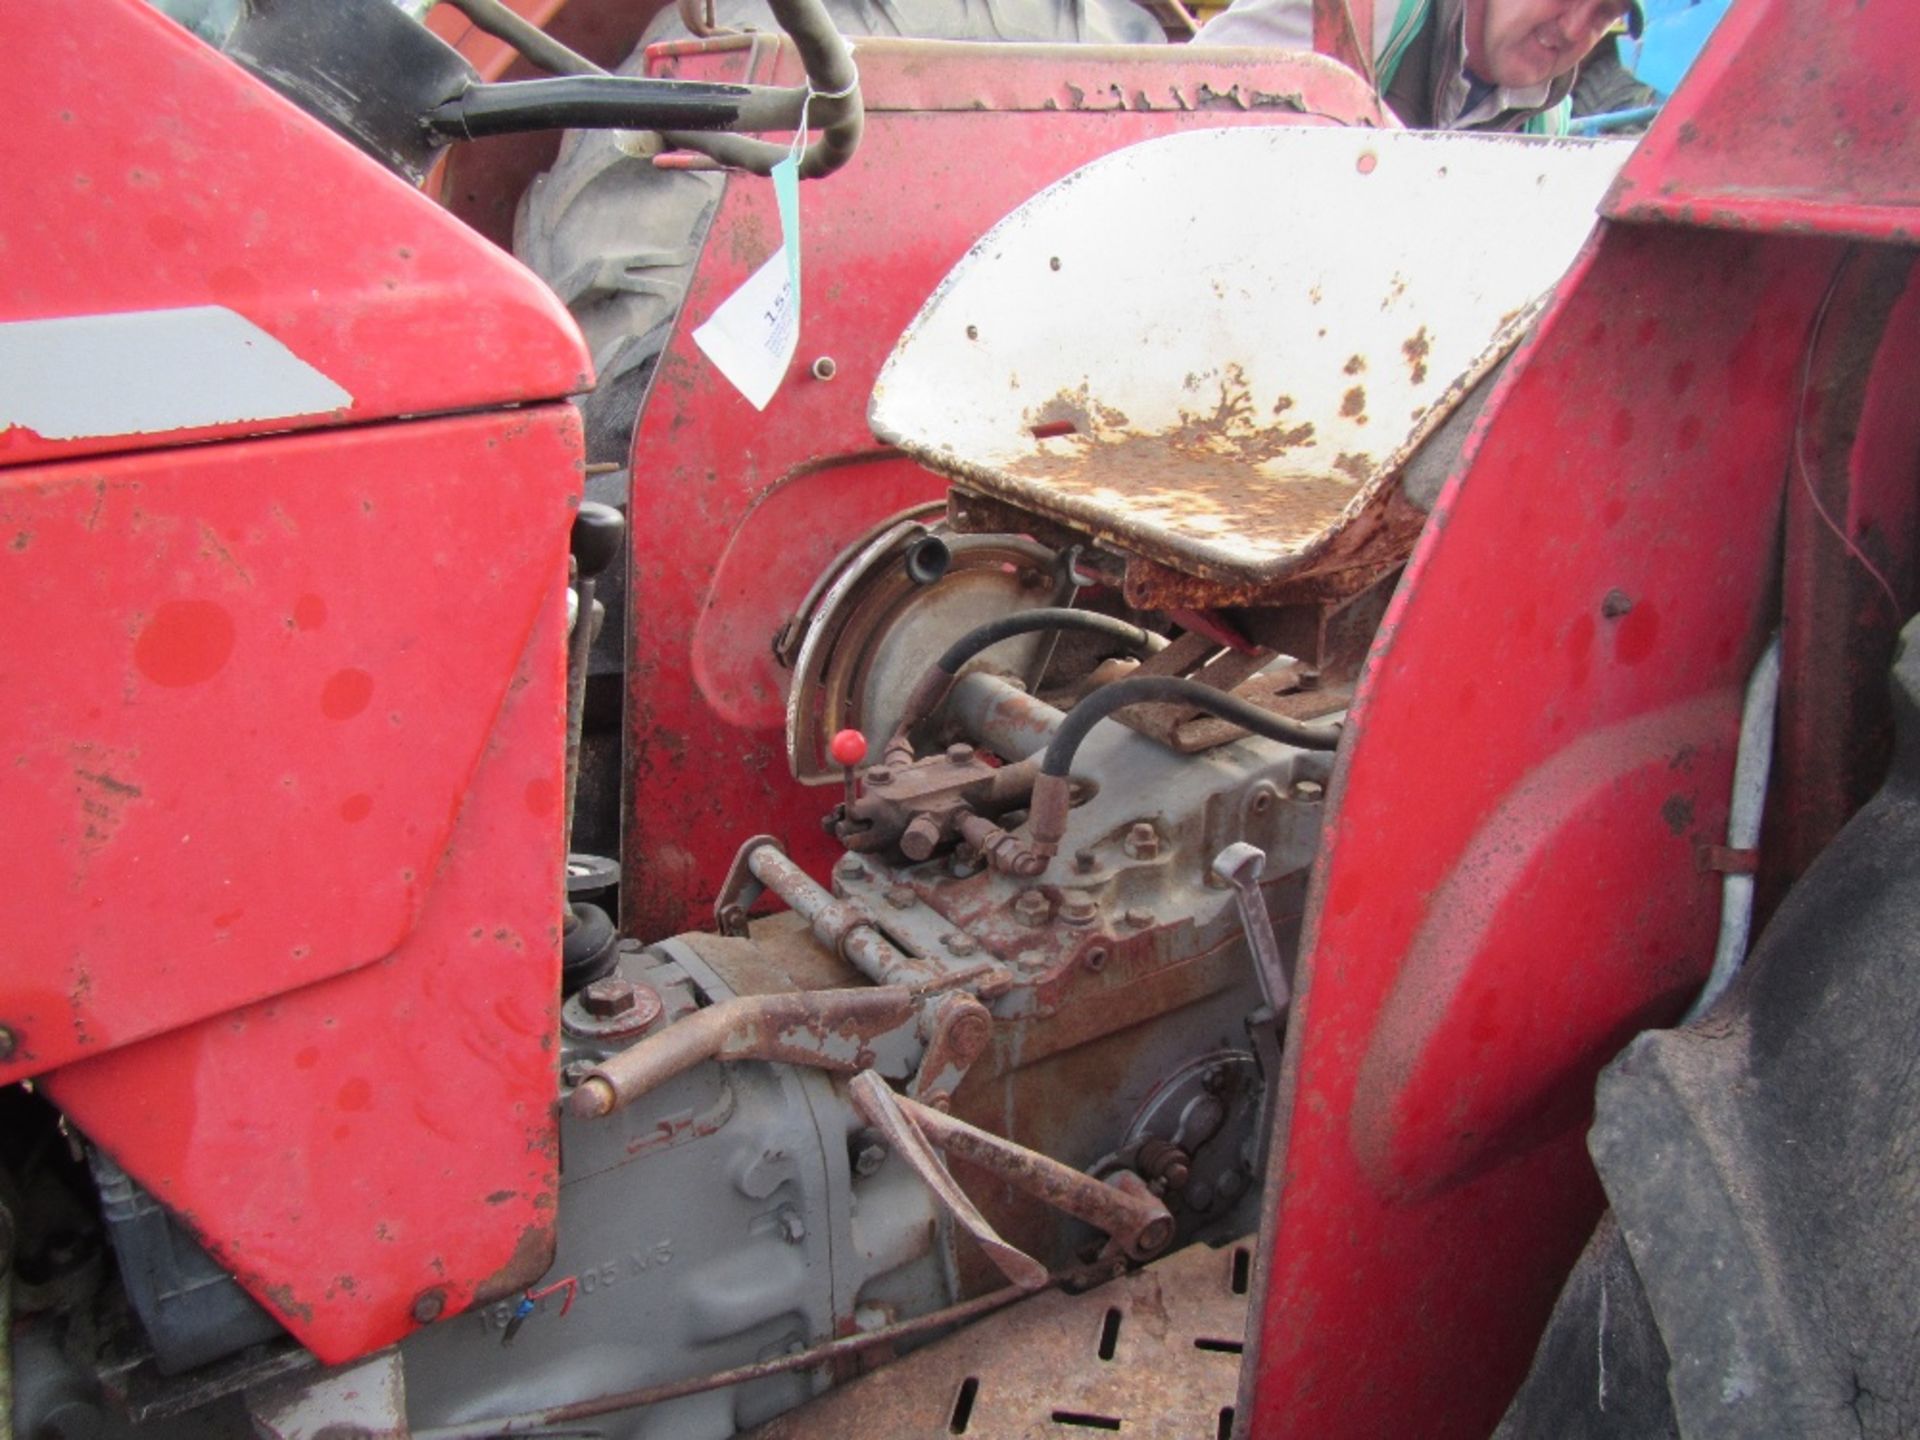 Massey Ferguson 165 Tractor with 4 Bolt Lift Pump Vin No. 149899 - Image 2 of 4